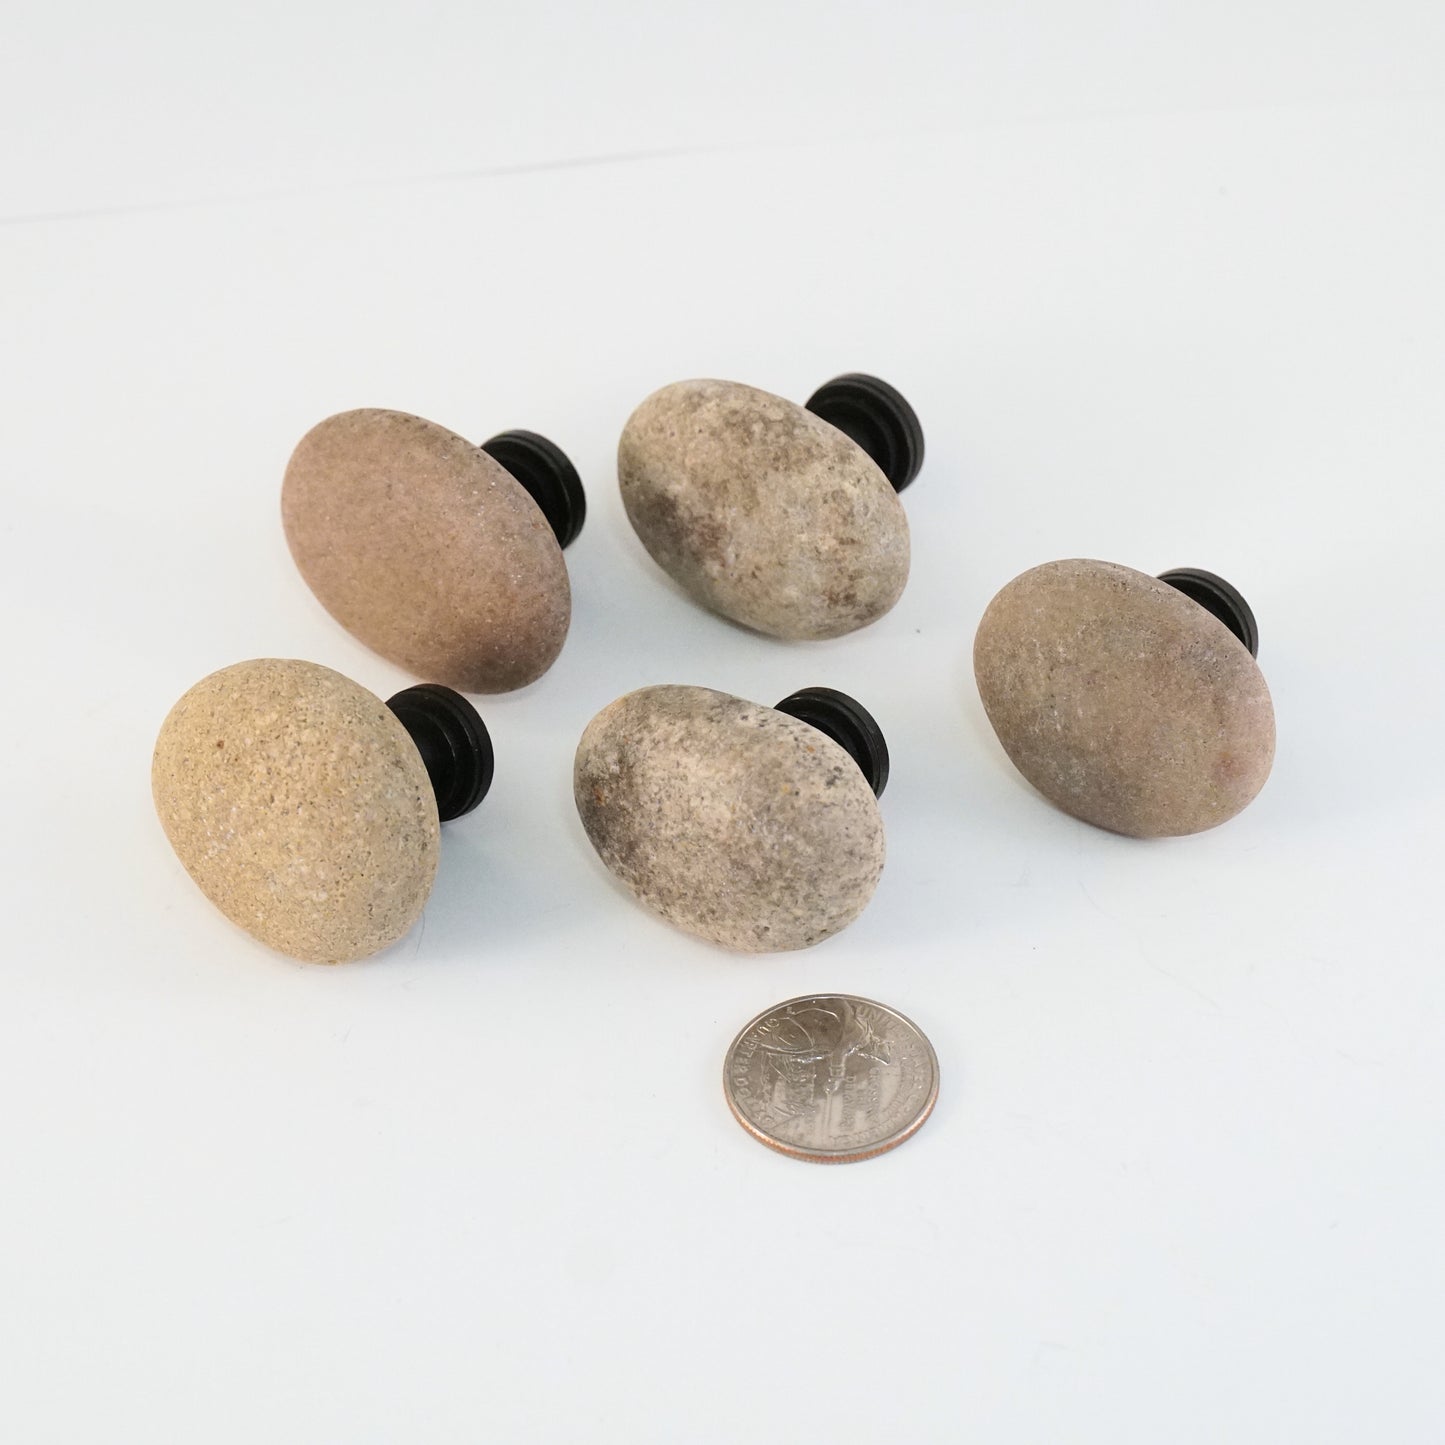 Beach Rock Stone Pebble Cabinet Knobs - Set of 5 - Ready to Ship